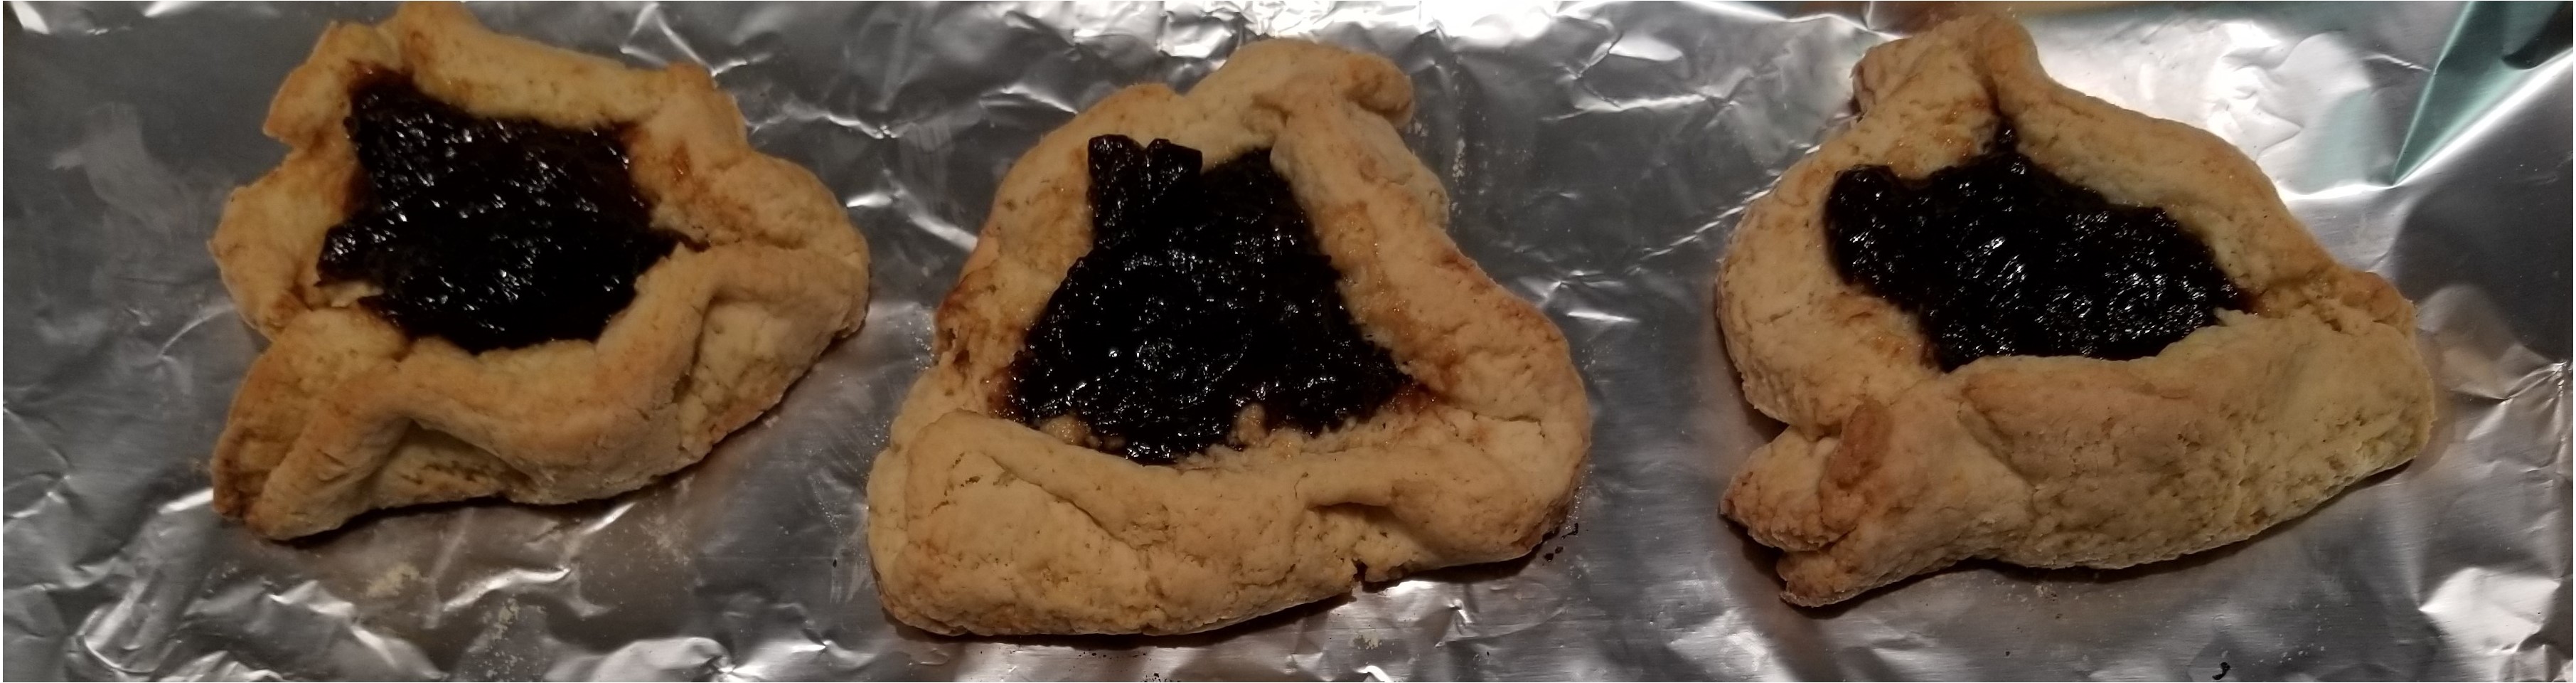 Purim Hamantaschen with Prune Filling Mary Williams